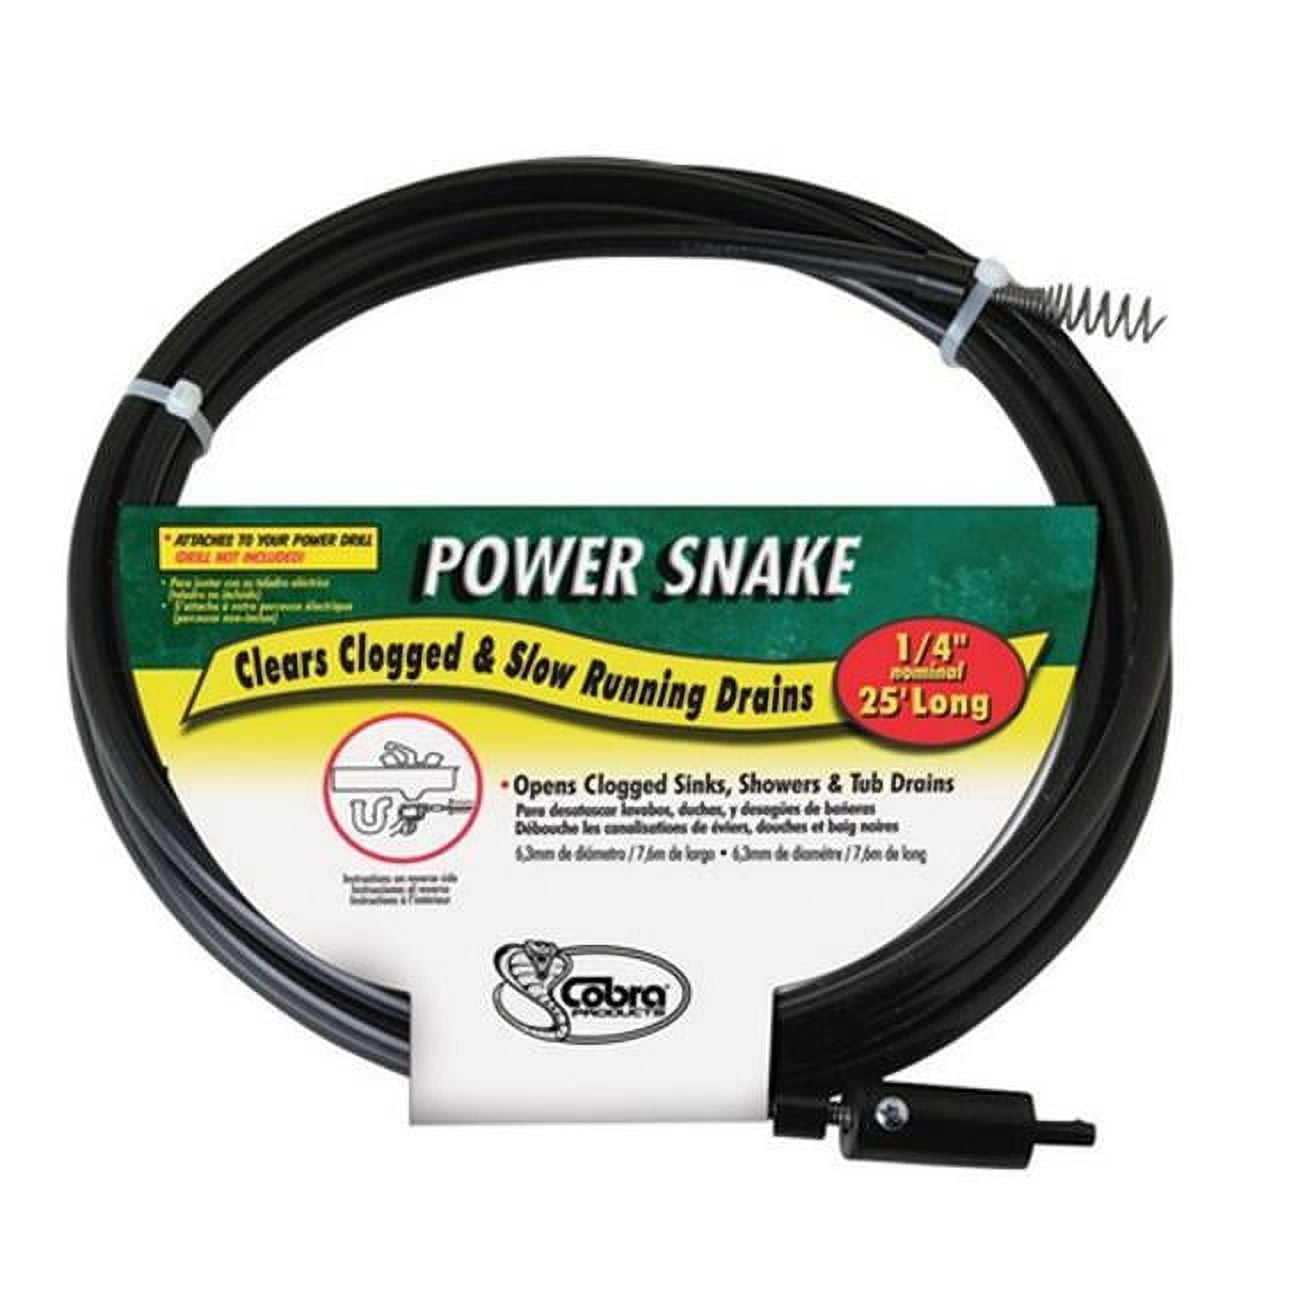 Jetcloudlive Plumbing Snake Drain Auger Manual Snake Drain Clog Remover with 23Ft/9.8Ft Flexible Wire Rope Reusable Drain Cleaner with Non-Slip Handle